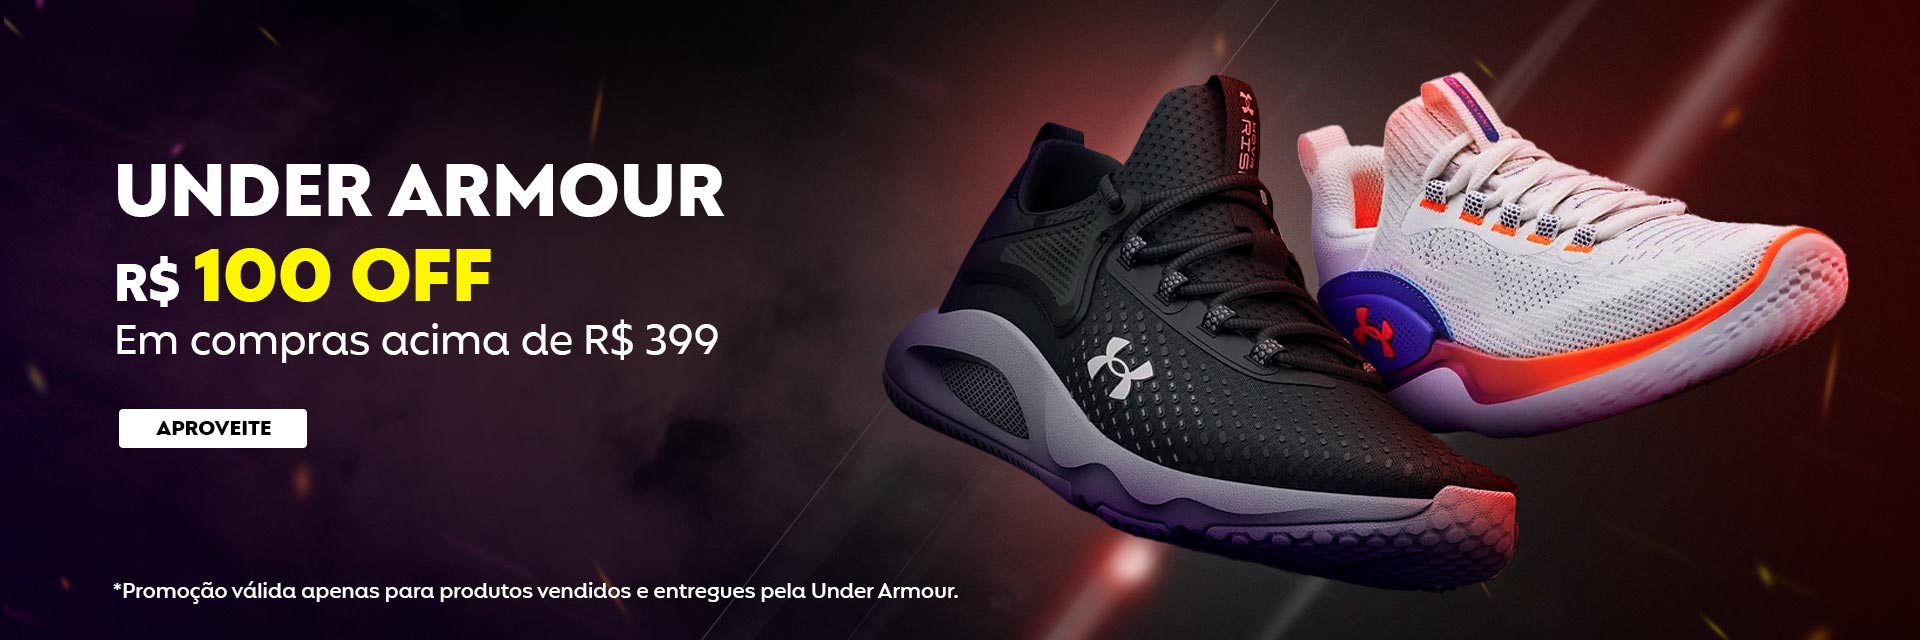 Under Armour 100 Off